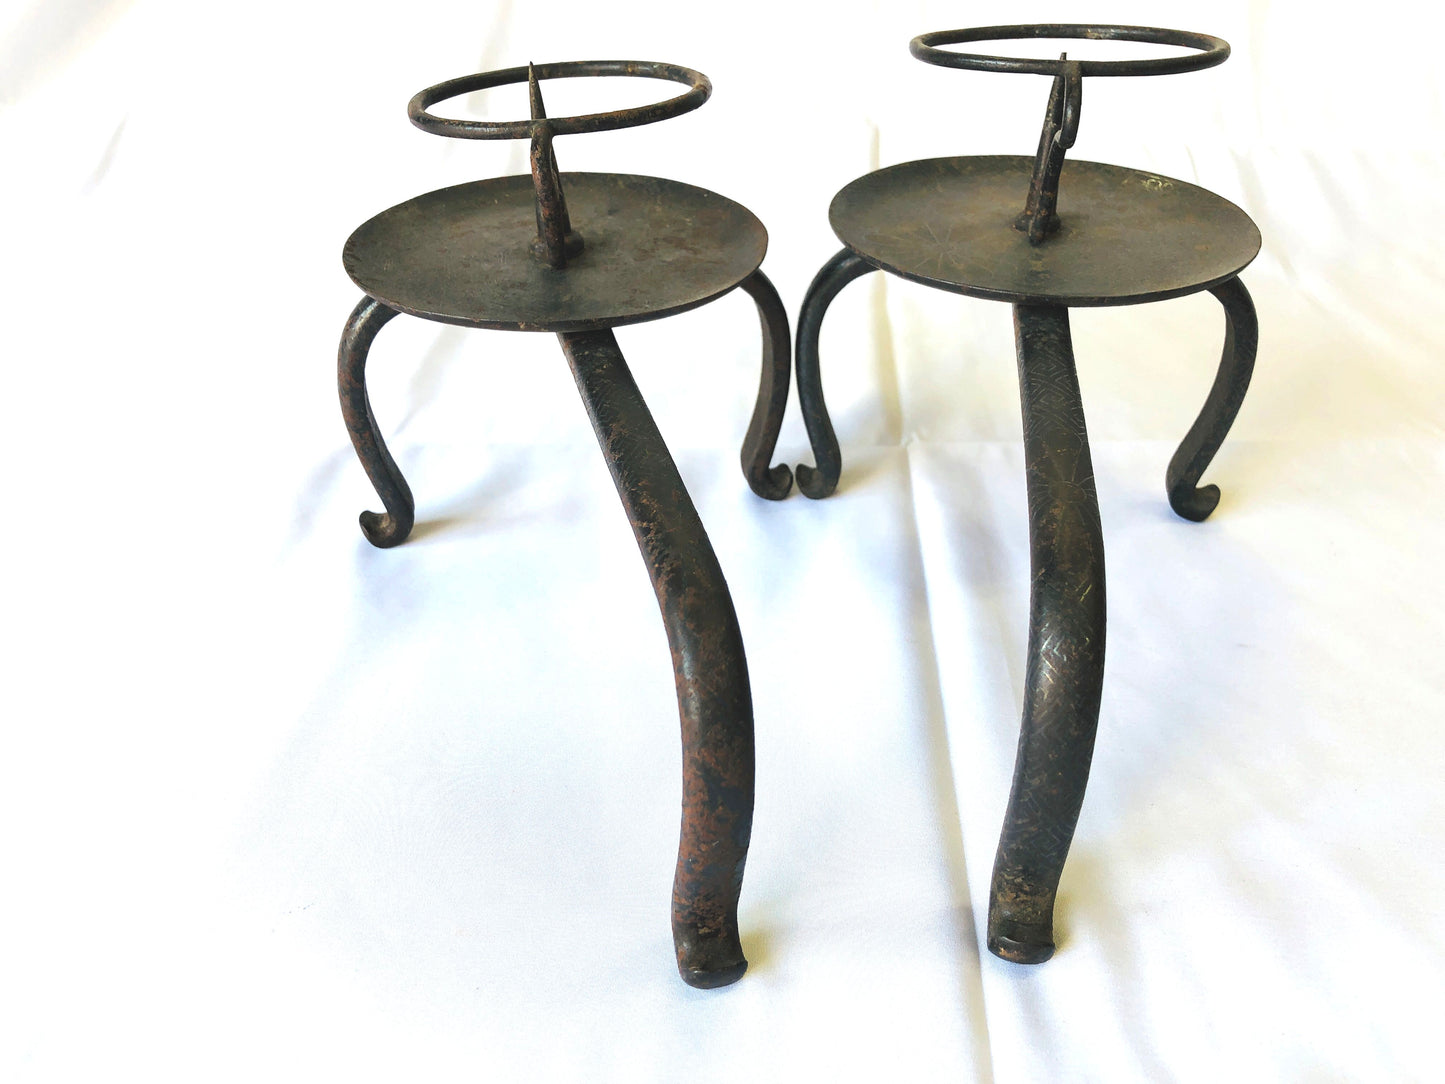 Y4386 Buddhist Altar Equipment Iron Candle Stand Holder pair inlay Japan antique